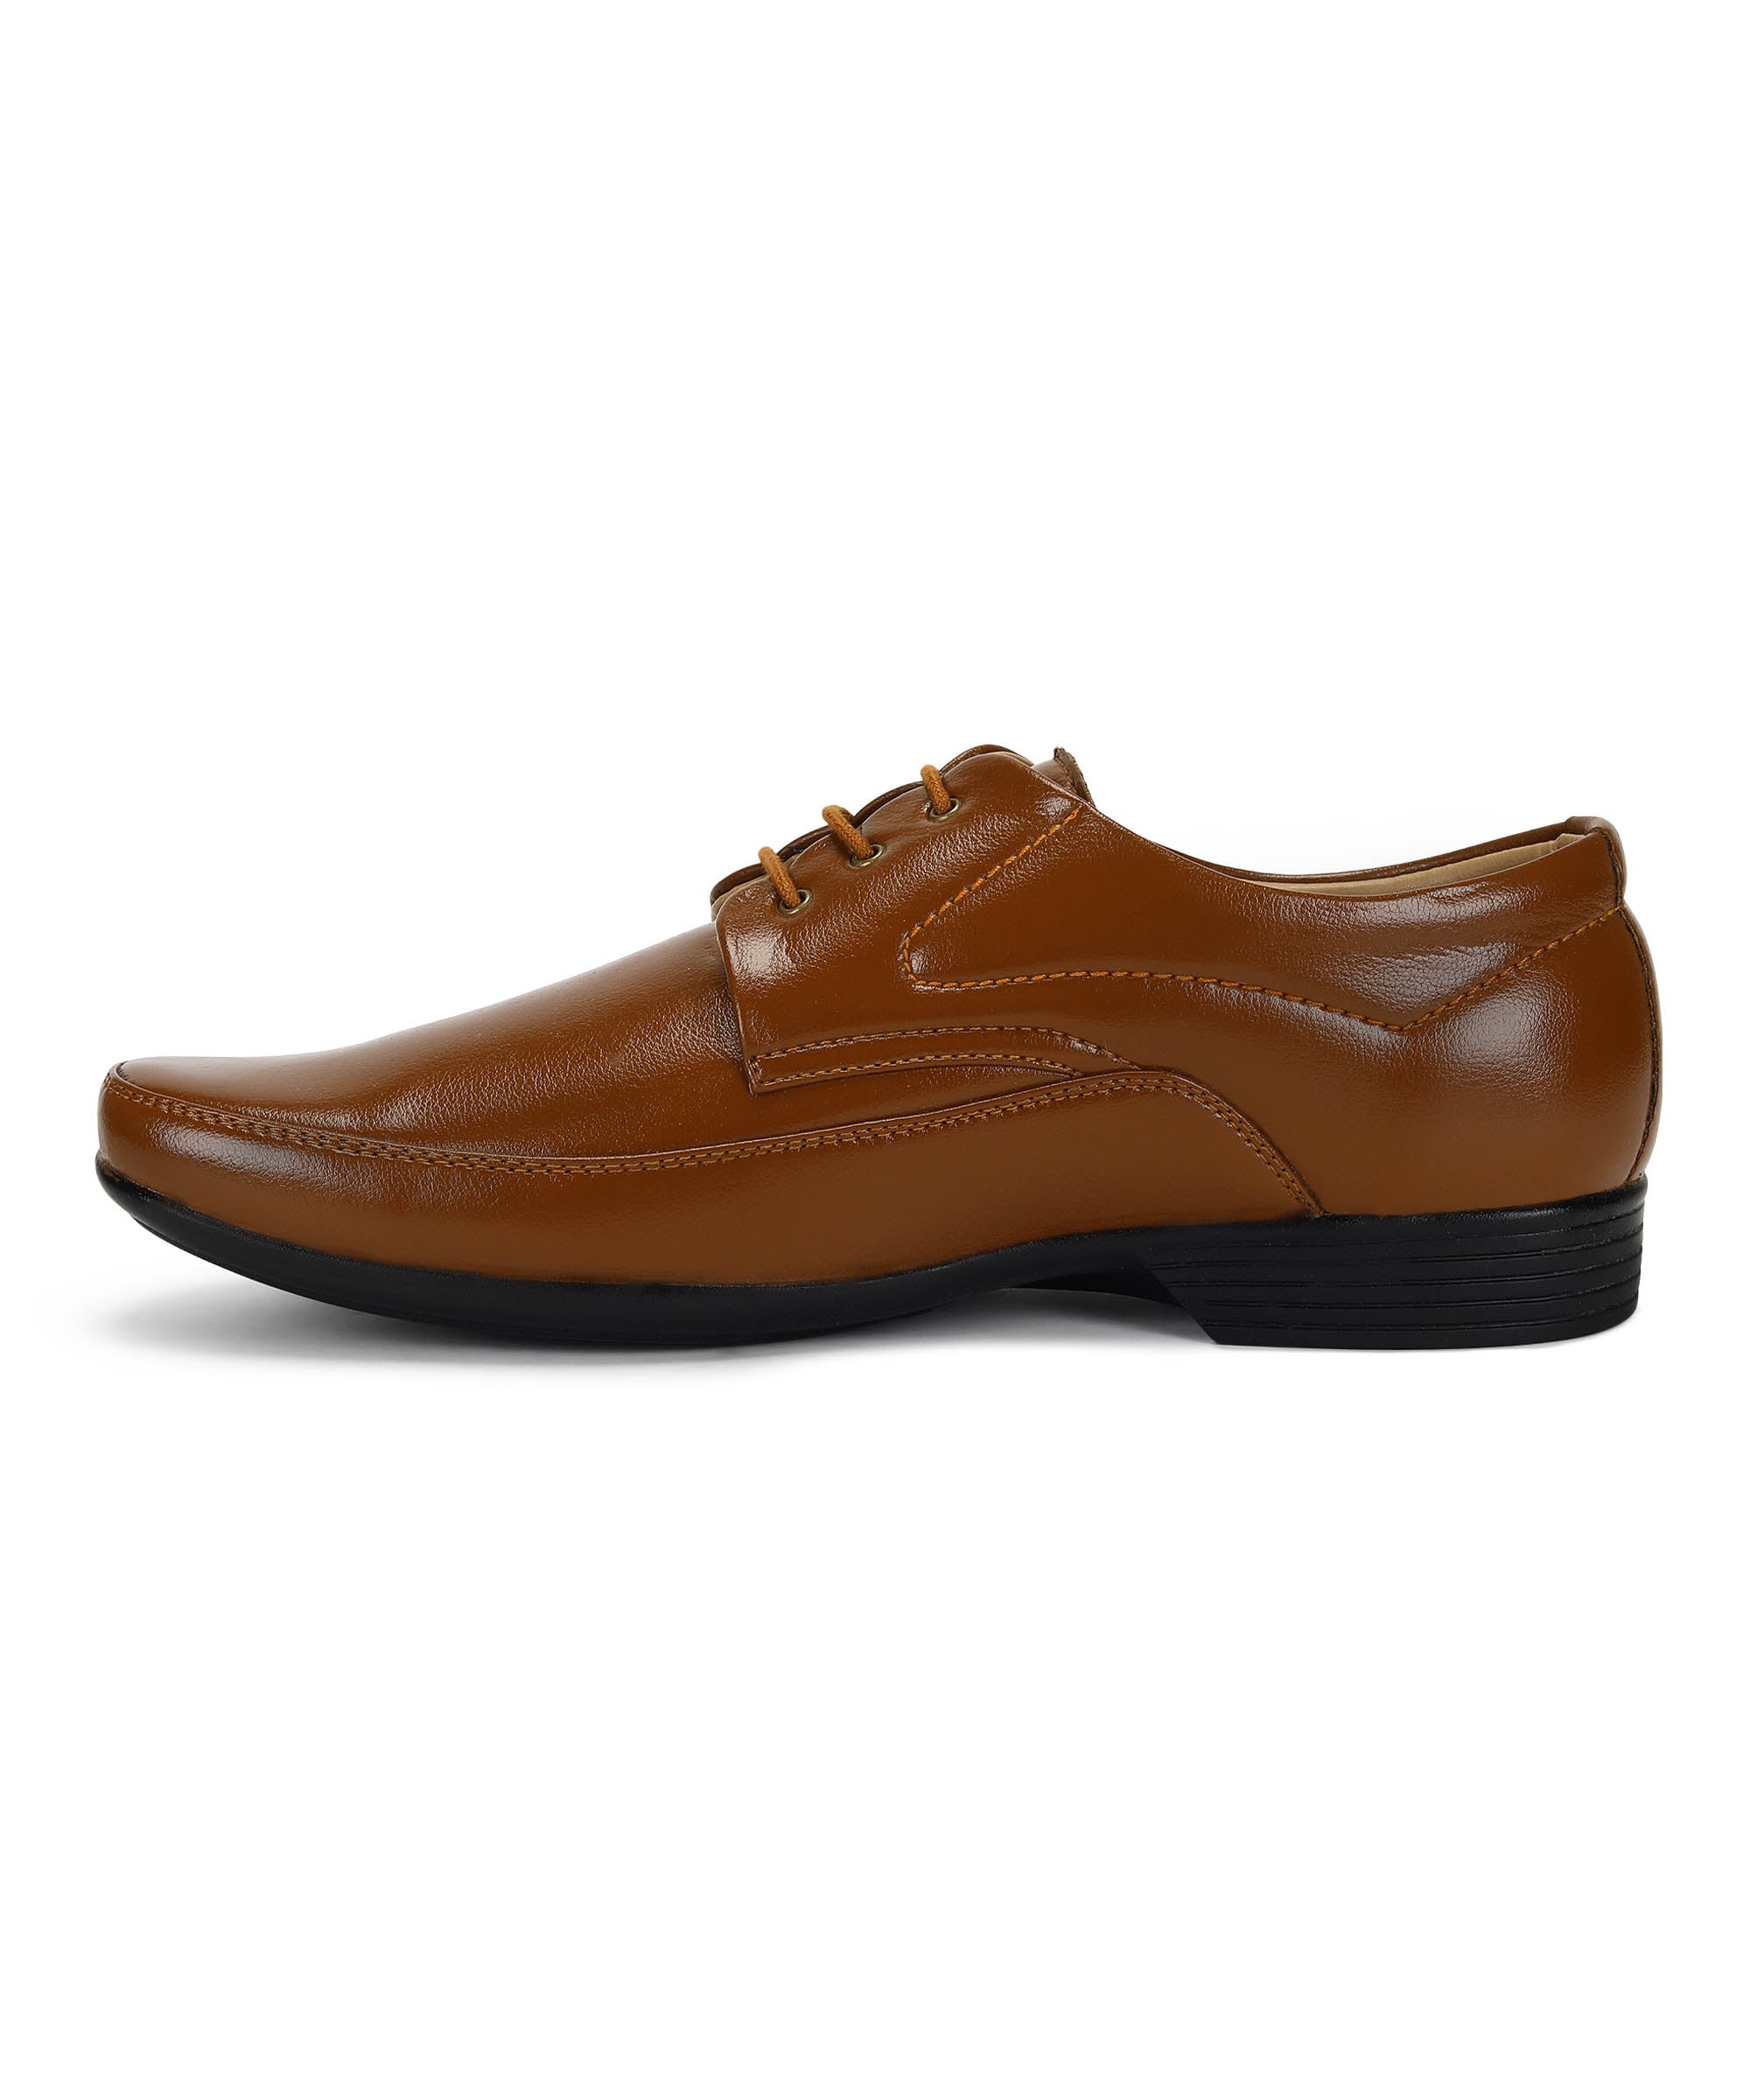 Paragon K11239G Men Formal Shoes | Corporate Office Shoes | Smart &amp; Sleek Design | Comfortable Sole with Cushioning | Daily &amp; Occasion Wear